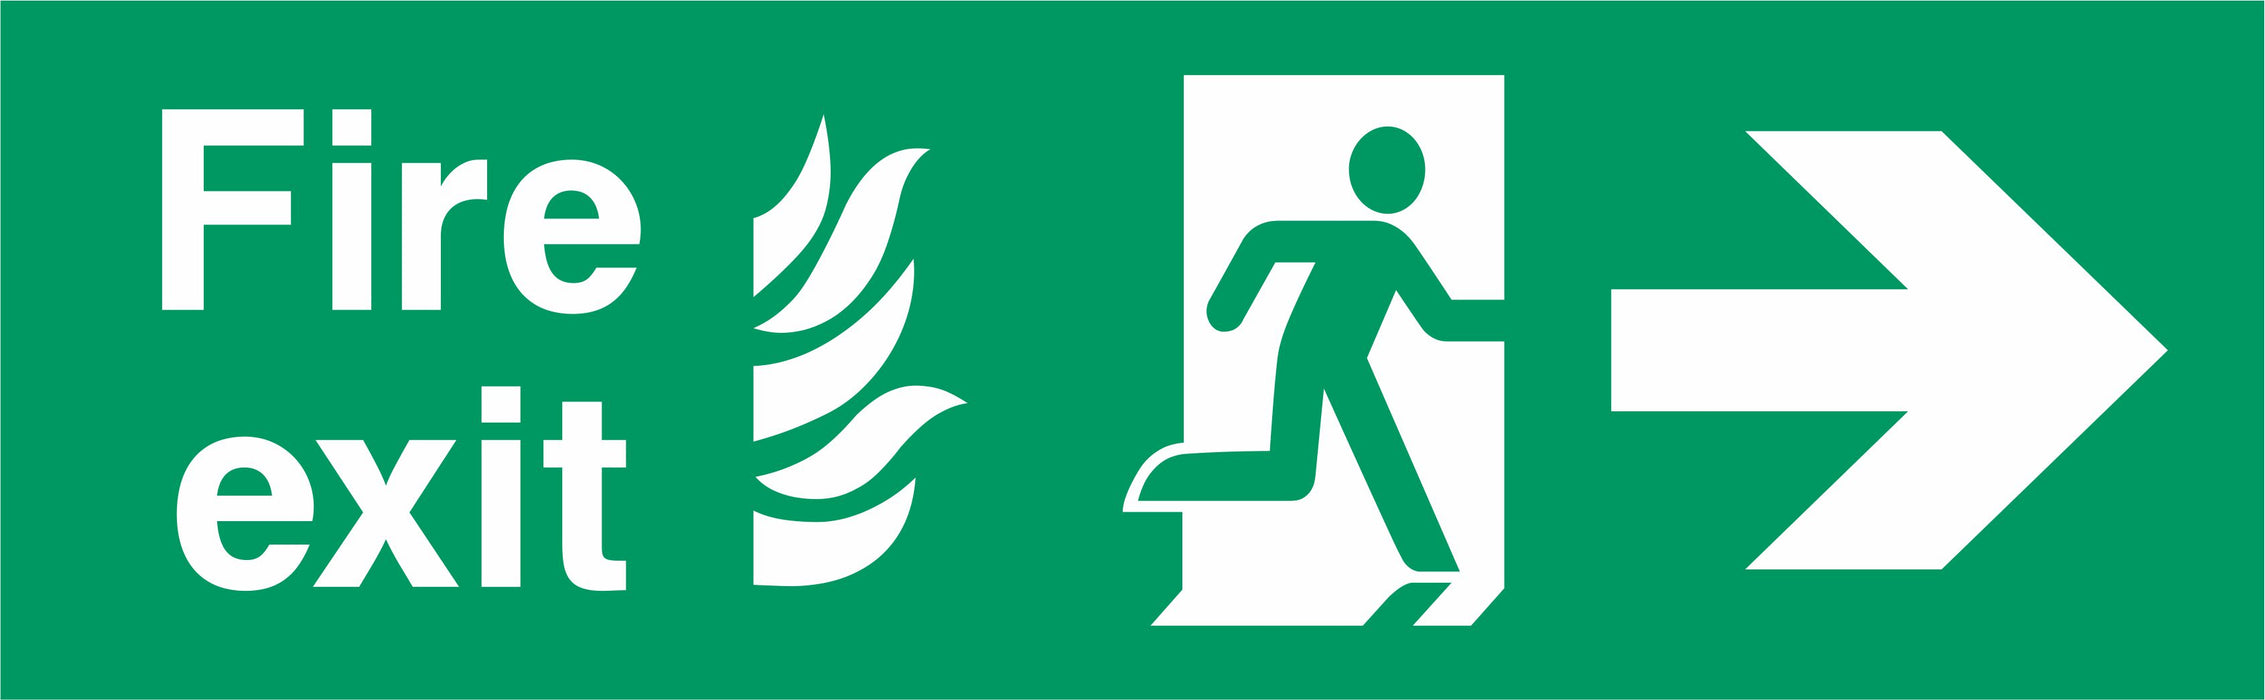 Fire Exit - Running Man Right - Right Arrow - NHS COMPLIANT